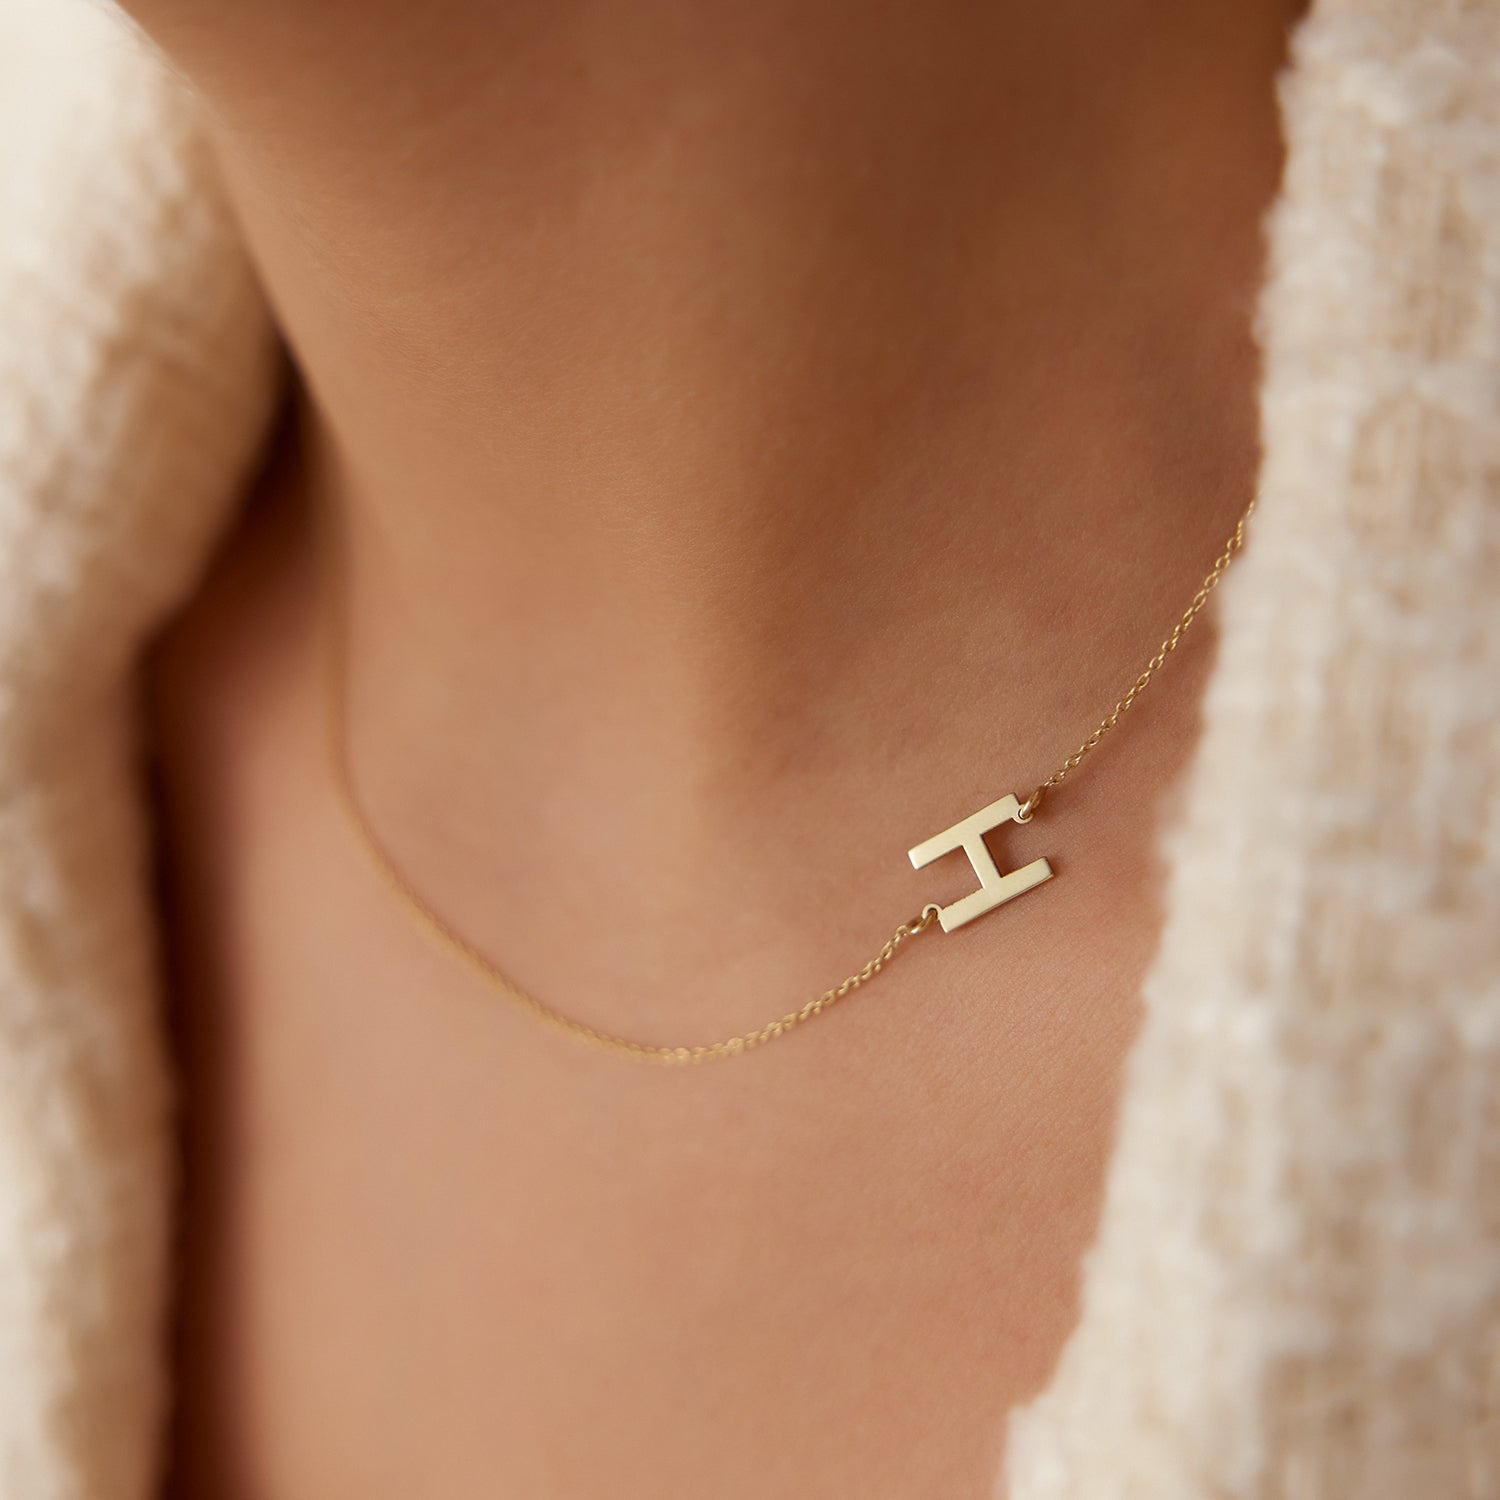 Star Necklace - Danielle | Ana Luisa | Online Jewelry Store At Prices  You'll Love